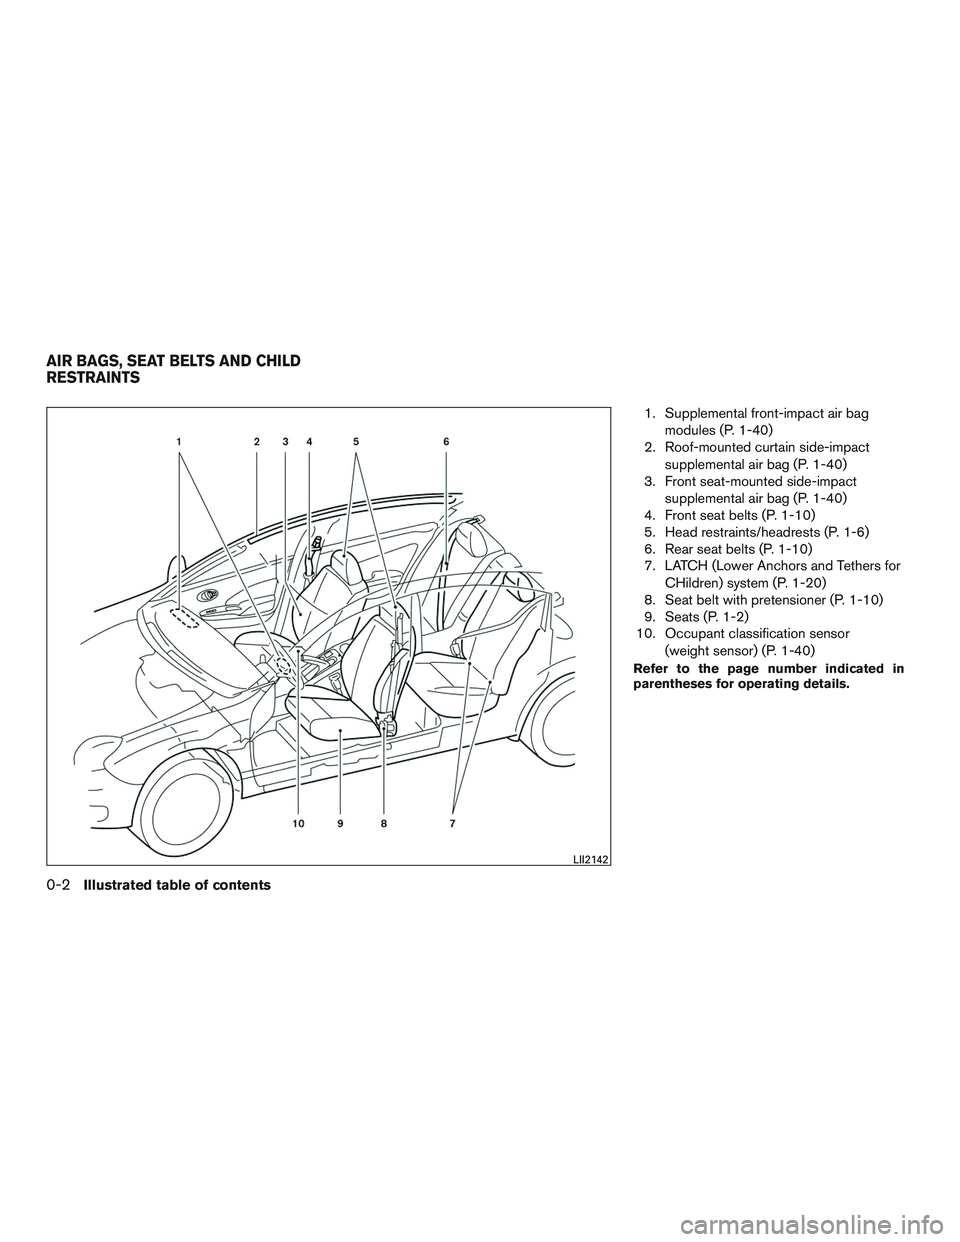 NISSAN MICRA 2010  Owners Manual 